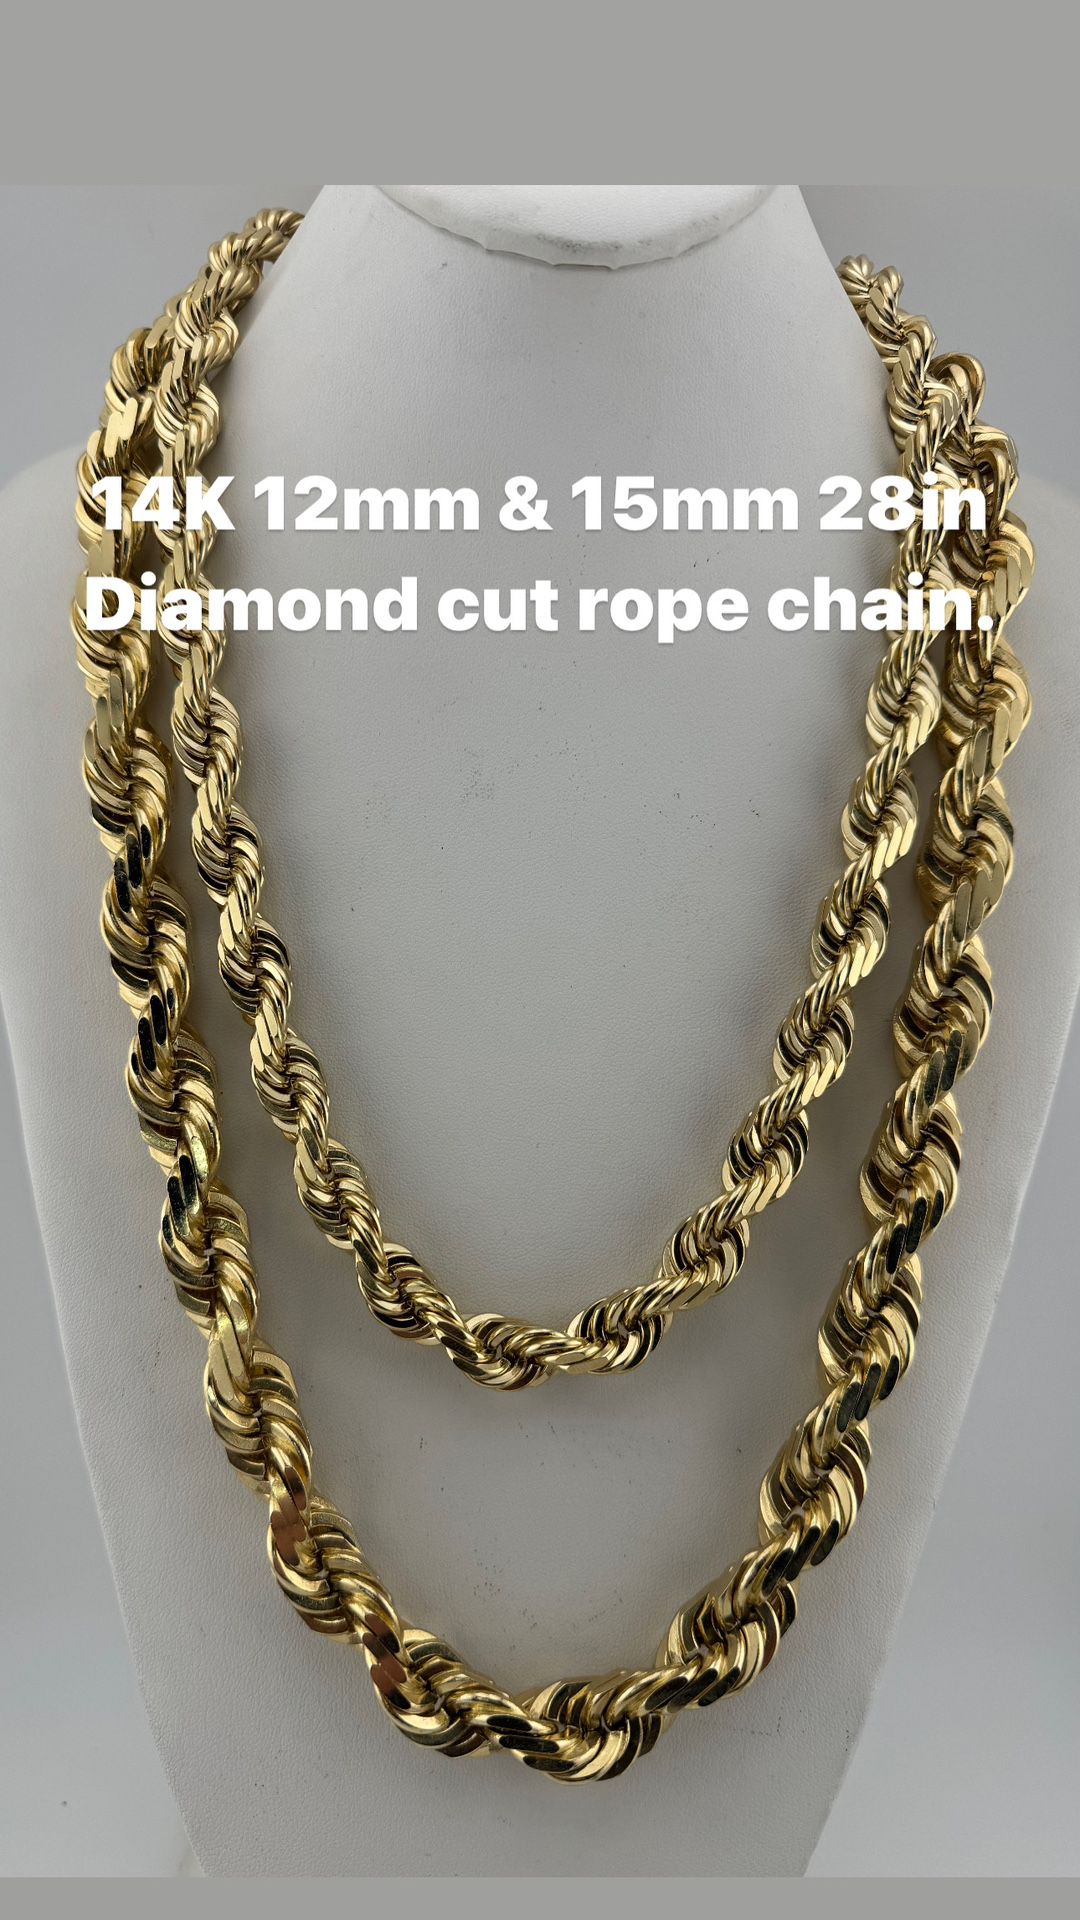 14K gold 12mm & 15mm 28in diamond cut rope chain. re stock.